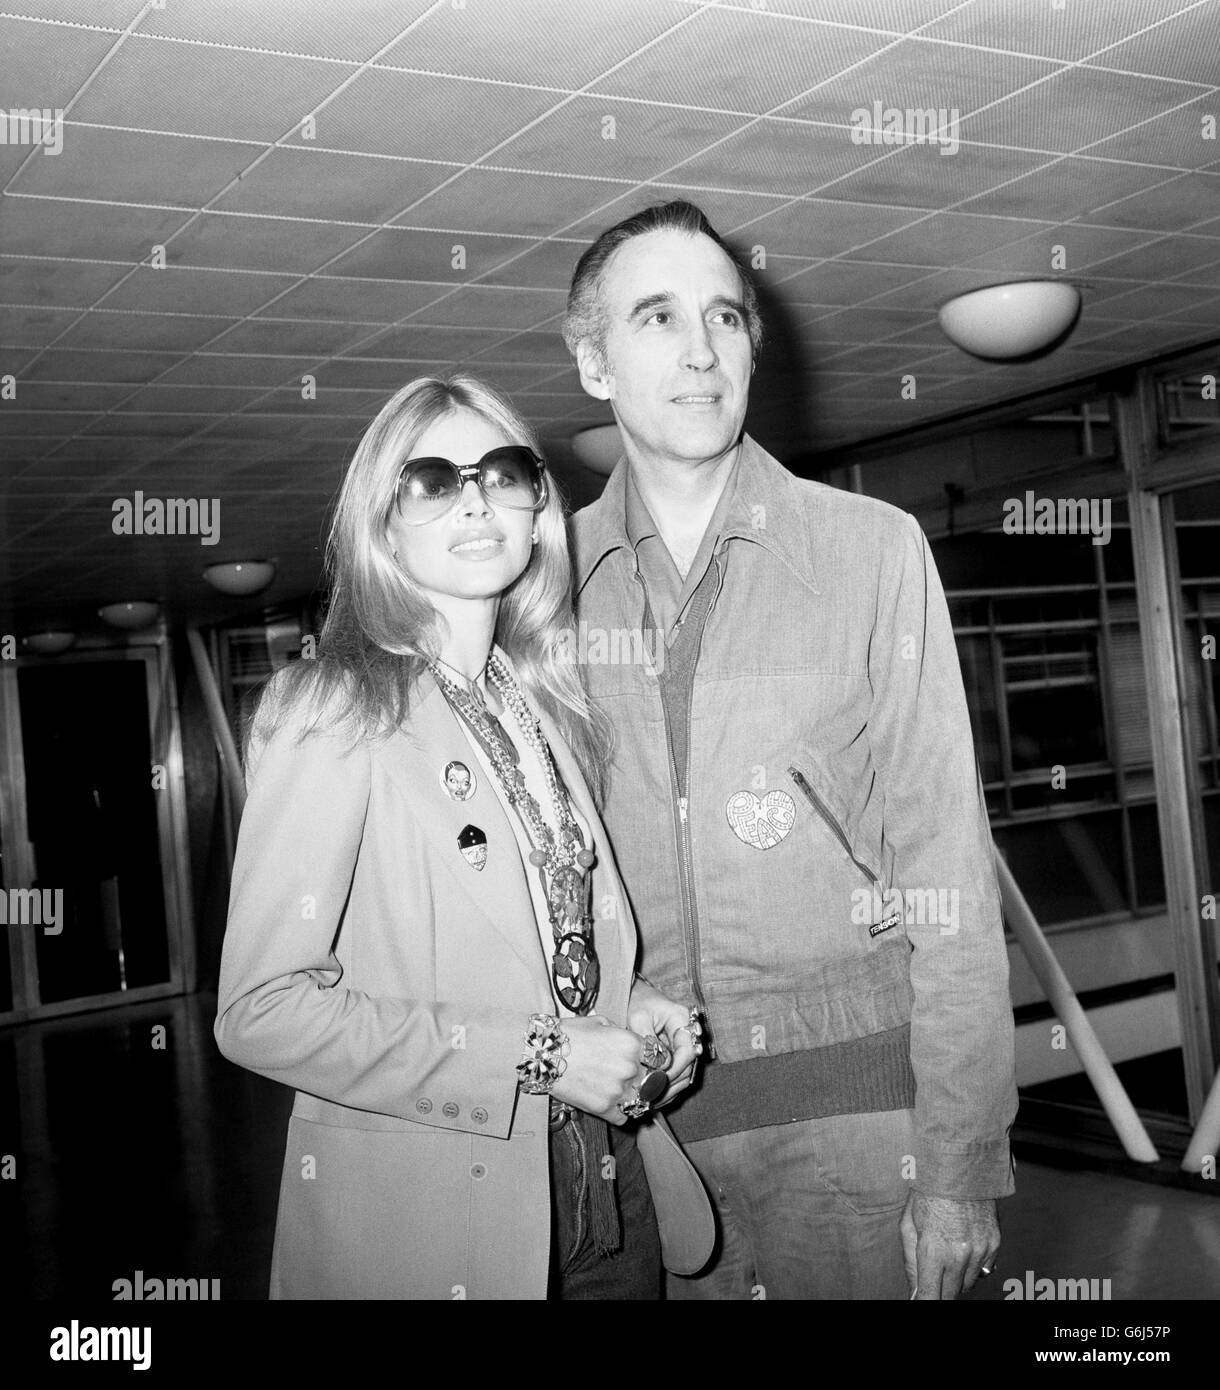 Britt Ekland and Christopher Lee, who play Mary Goodnight and Scaramanga in the James Bond film The Man with the Golden Gun. They were at Heathrow Airport, before flying to Bangkok to begin filming. Stock Photo